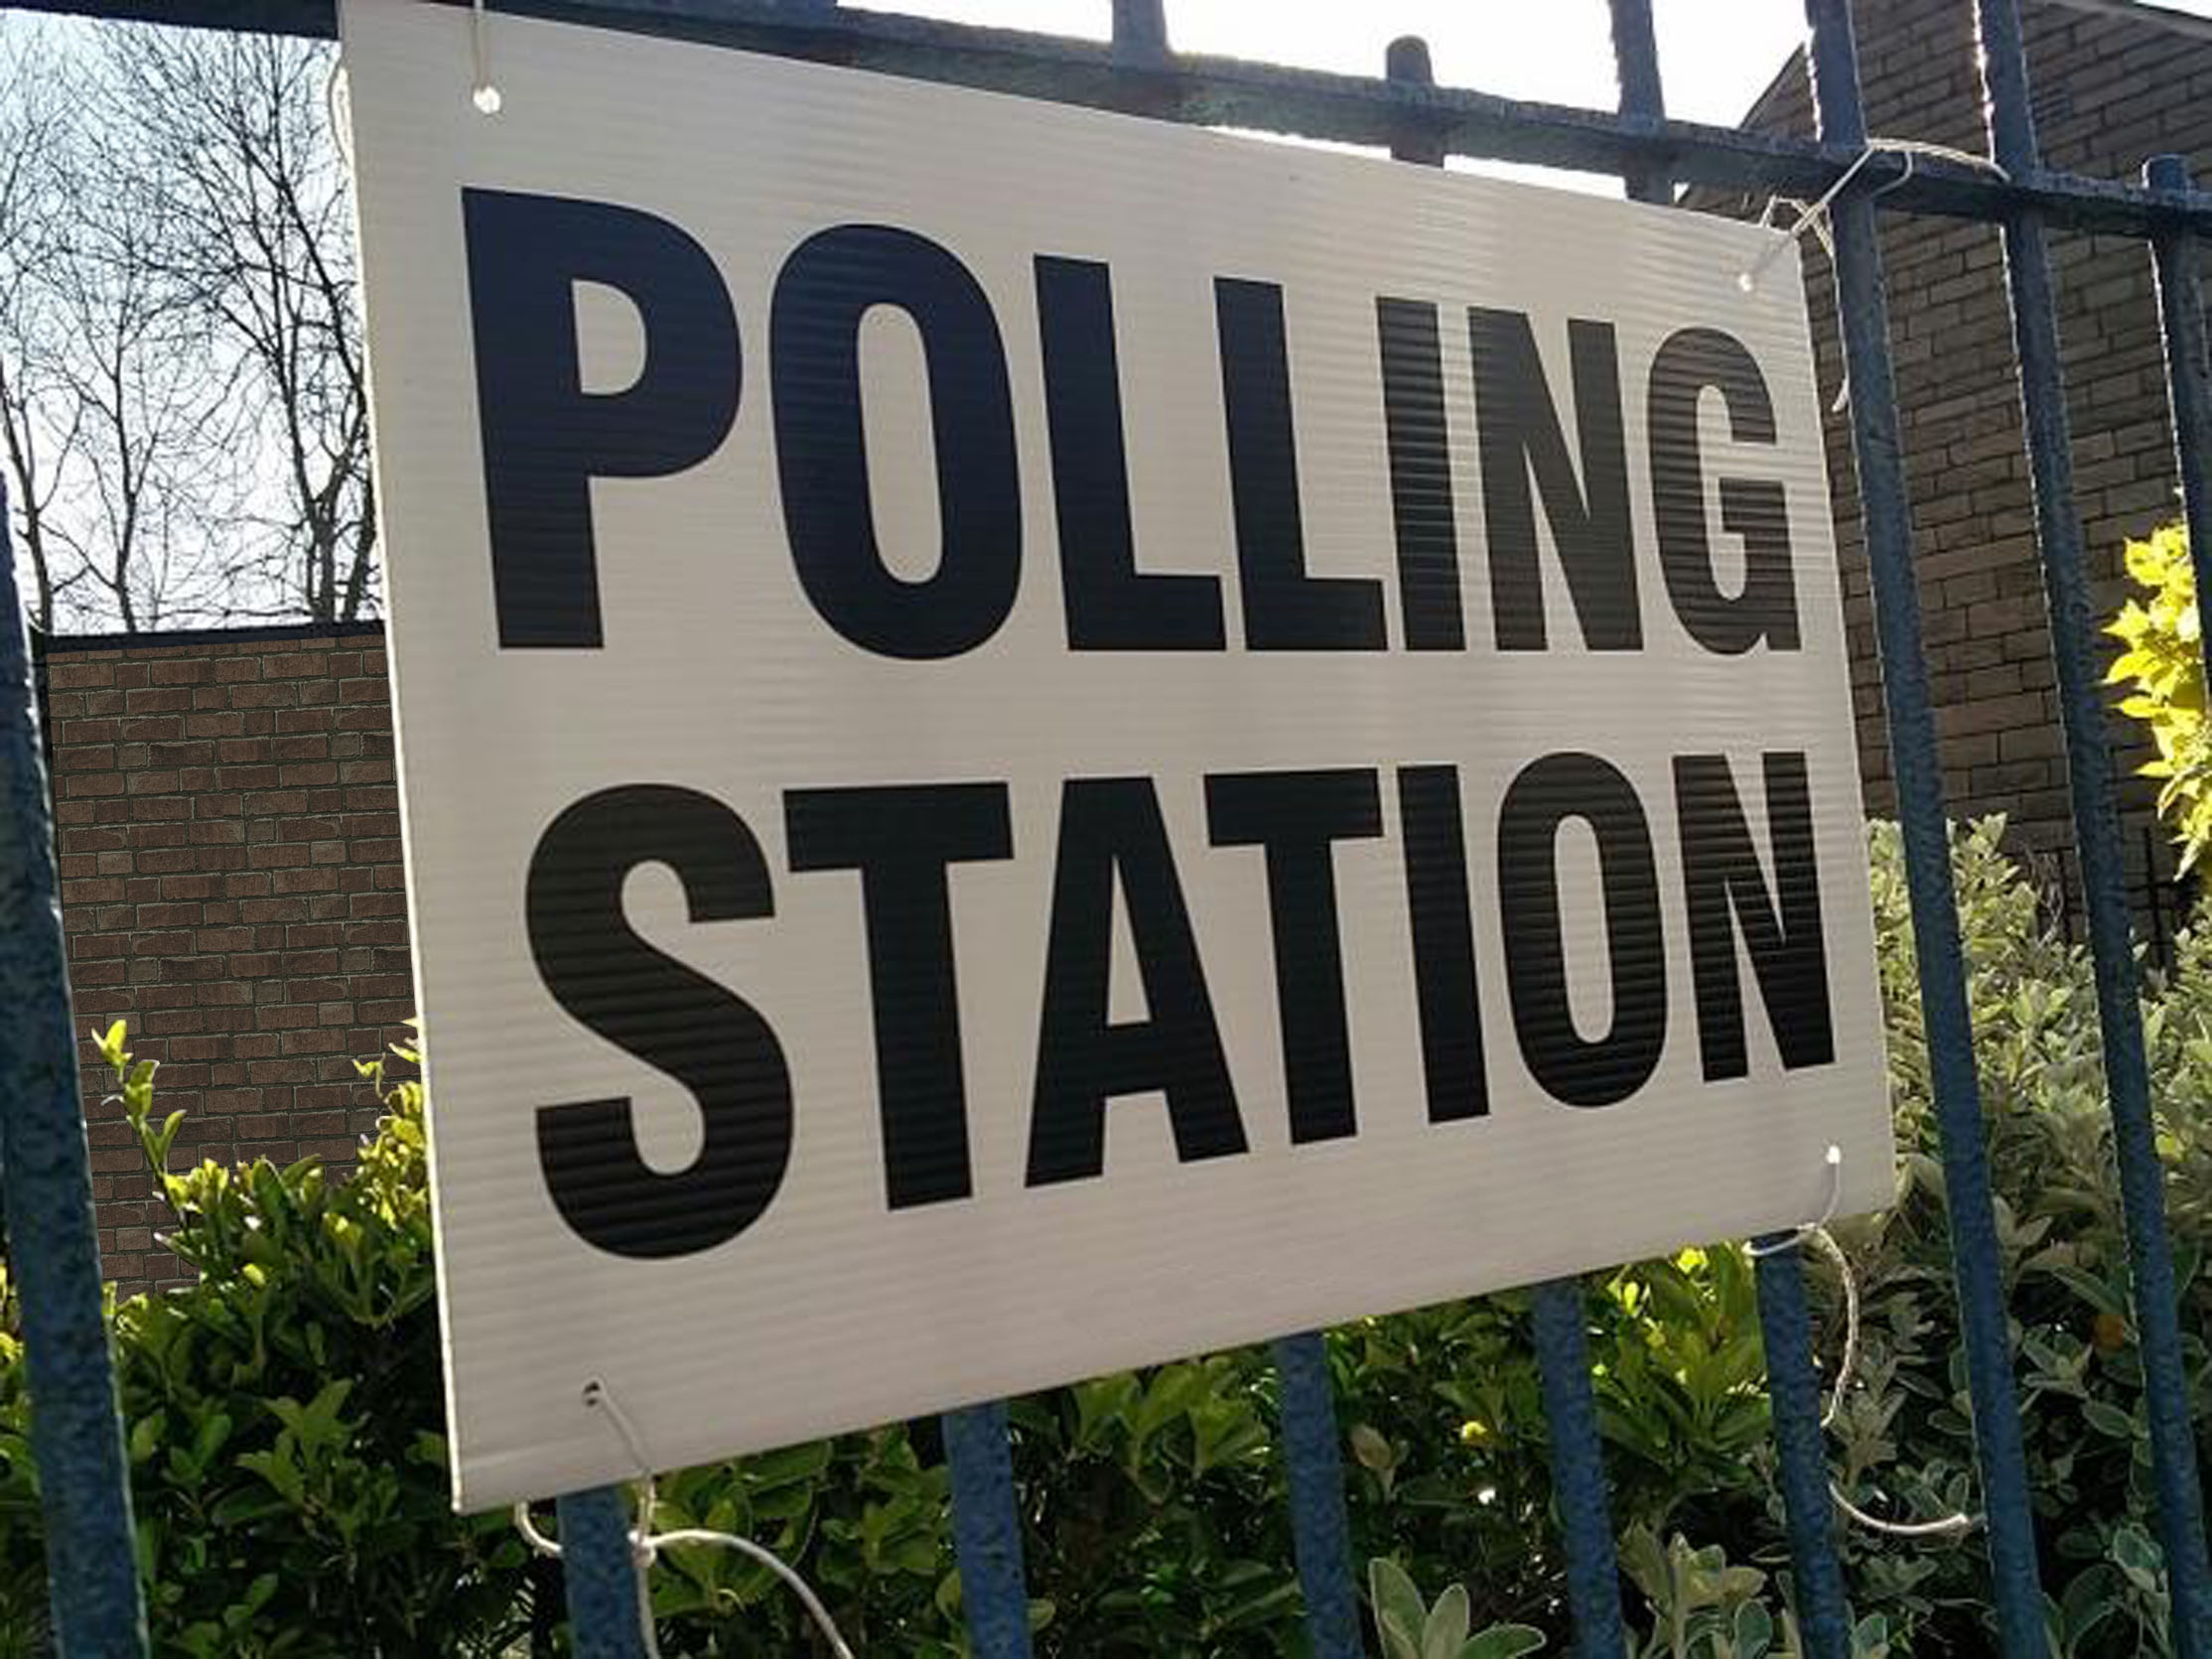 Polling Station 5th May 2022